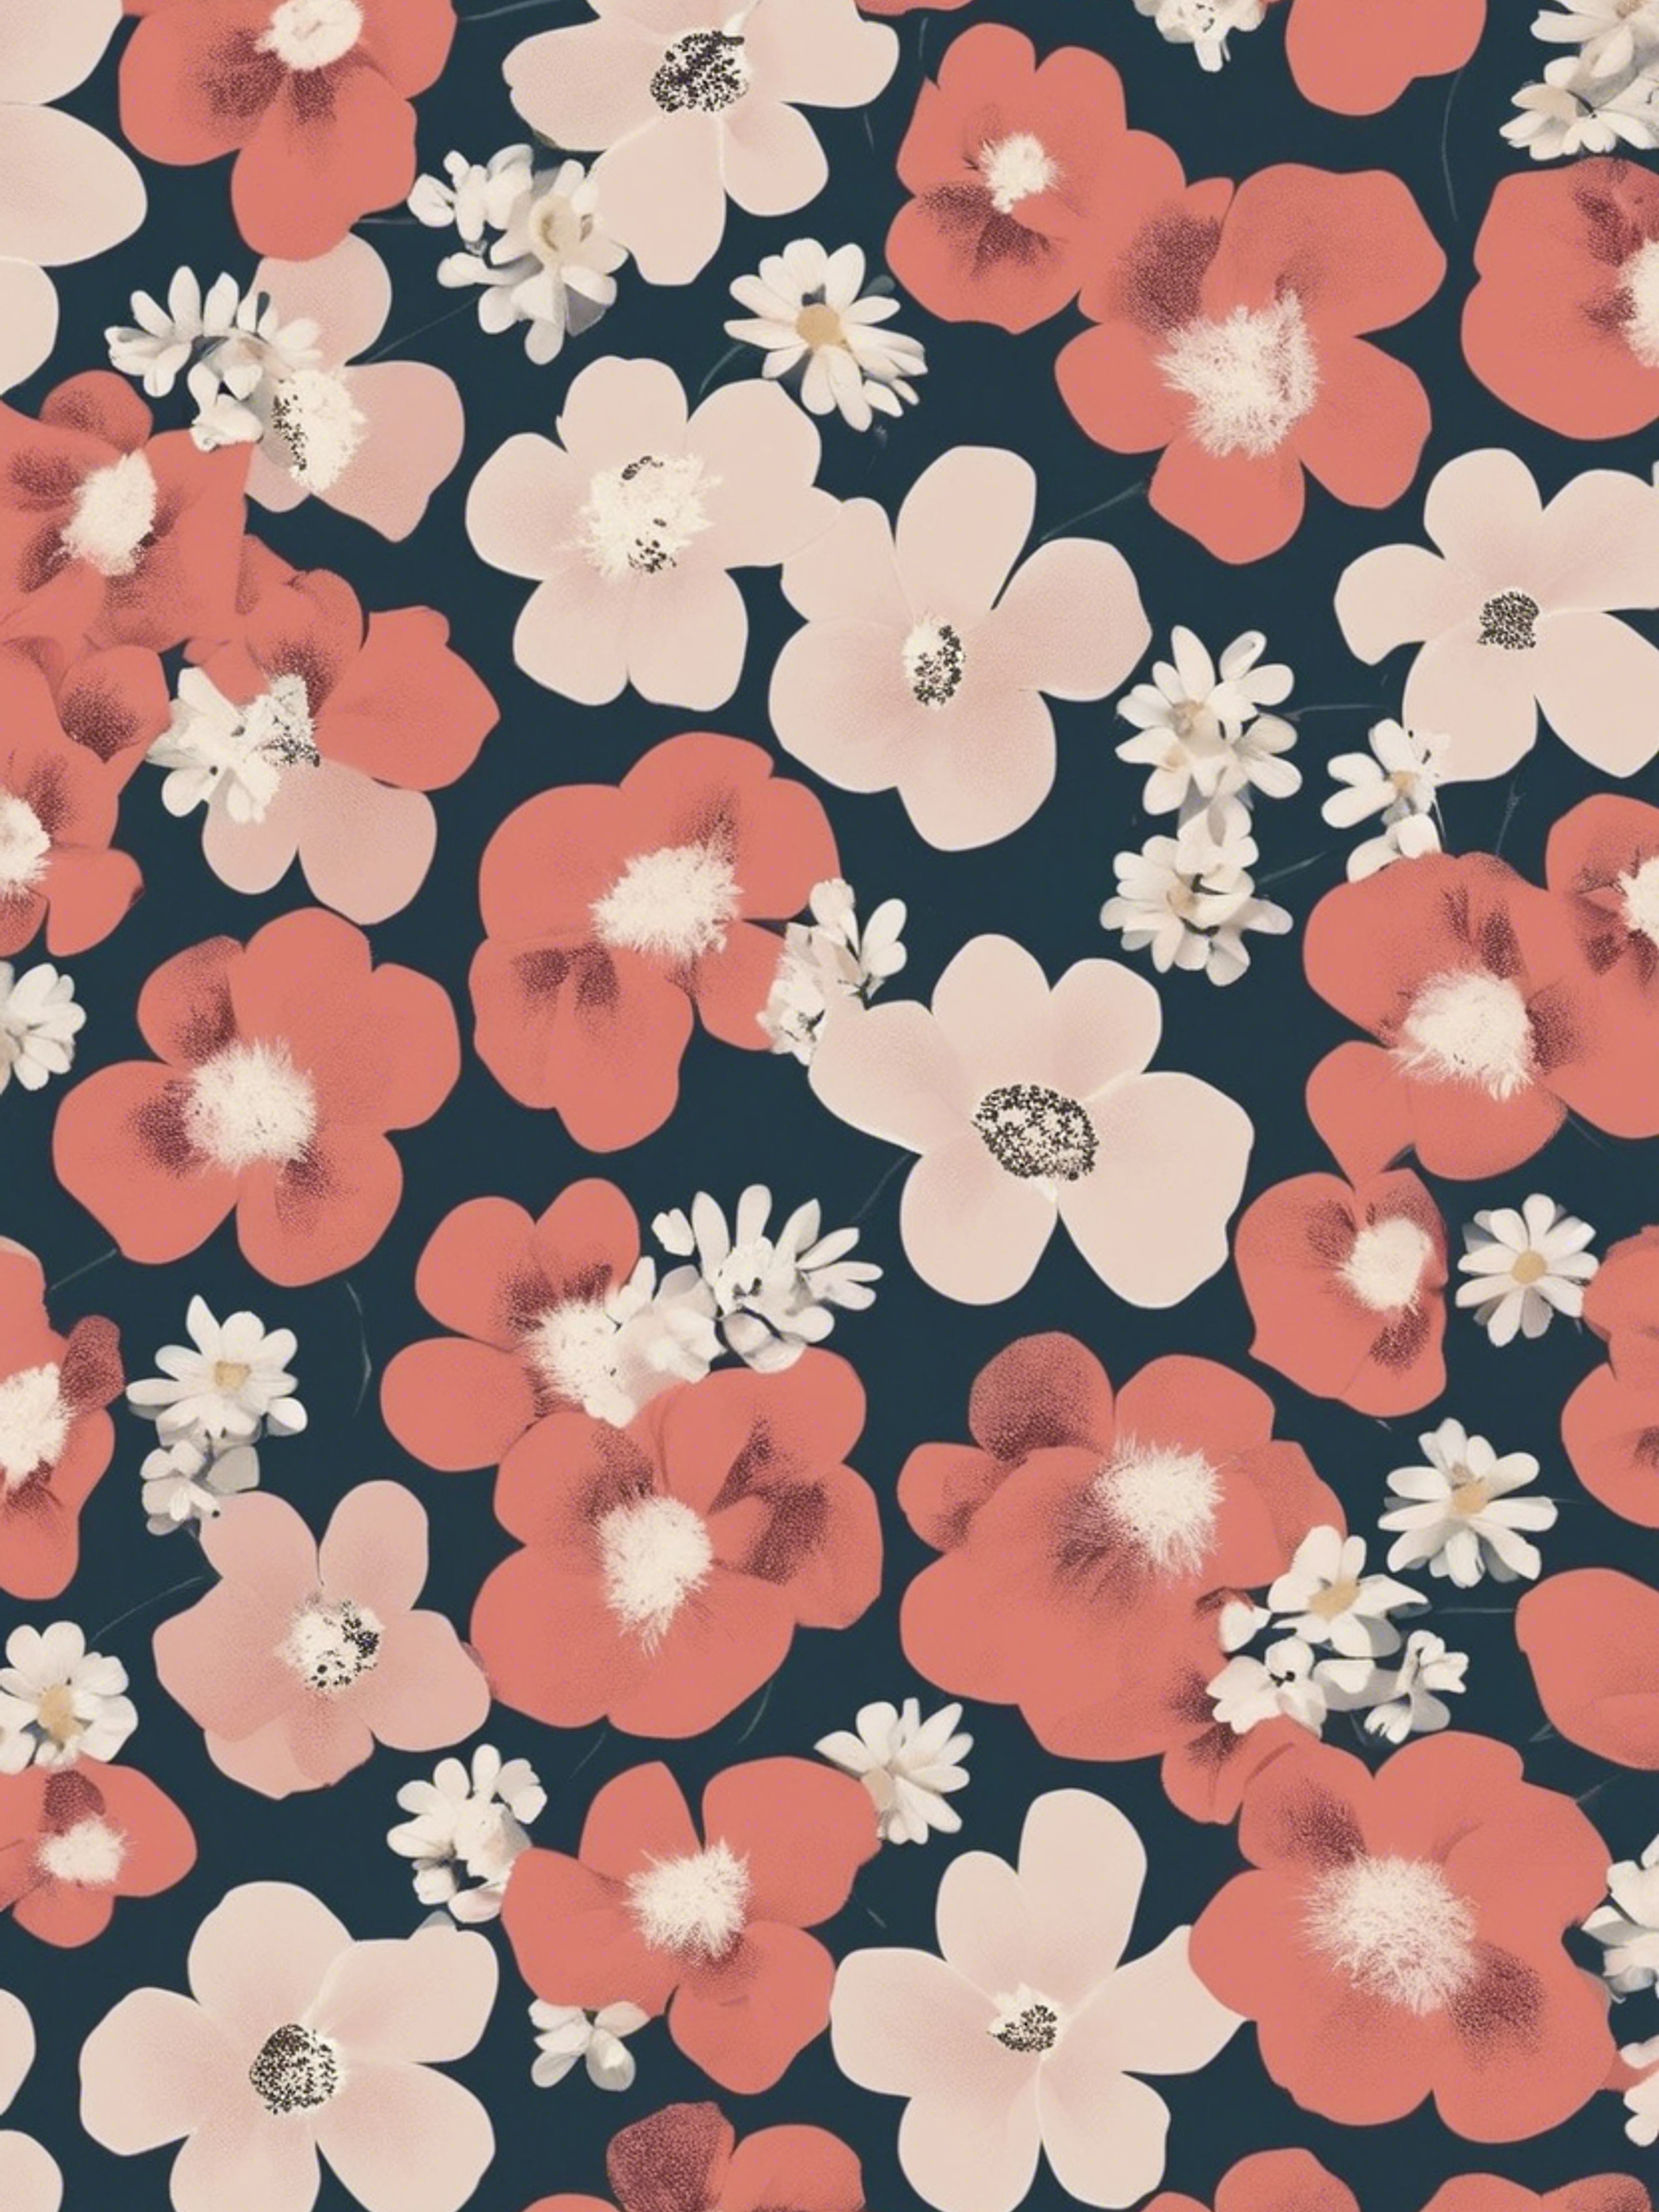 Bold, 1950s style floral print on a polka dot background.壁紙[96e7fe23767d49ef8c2d]